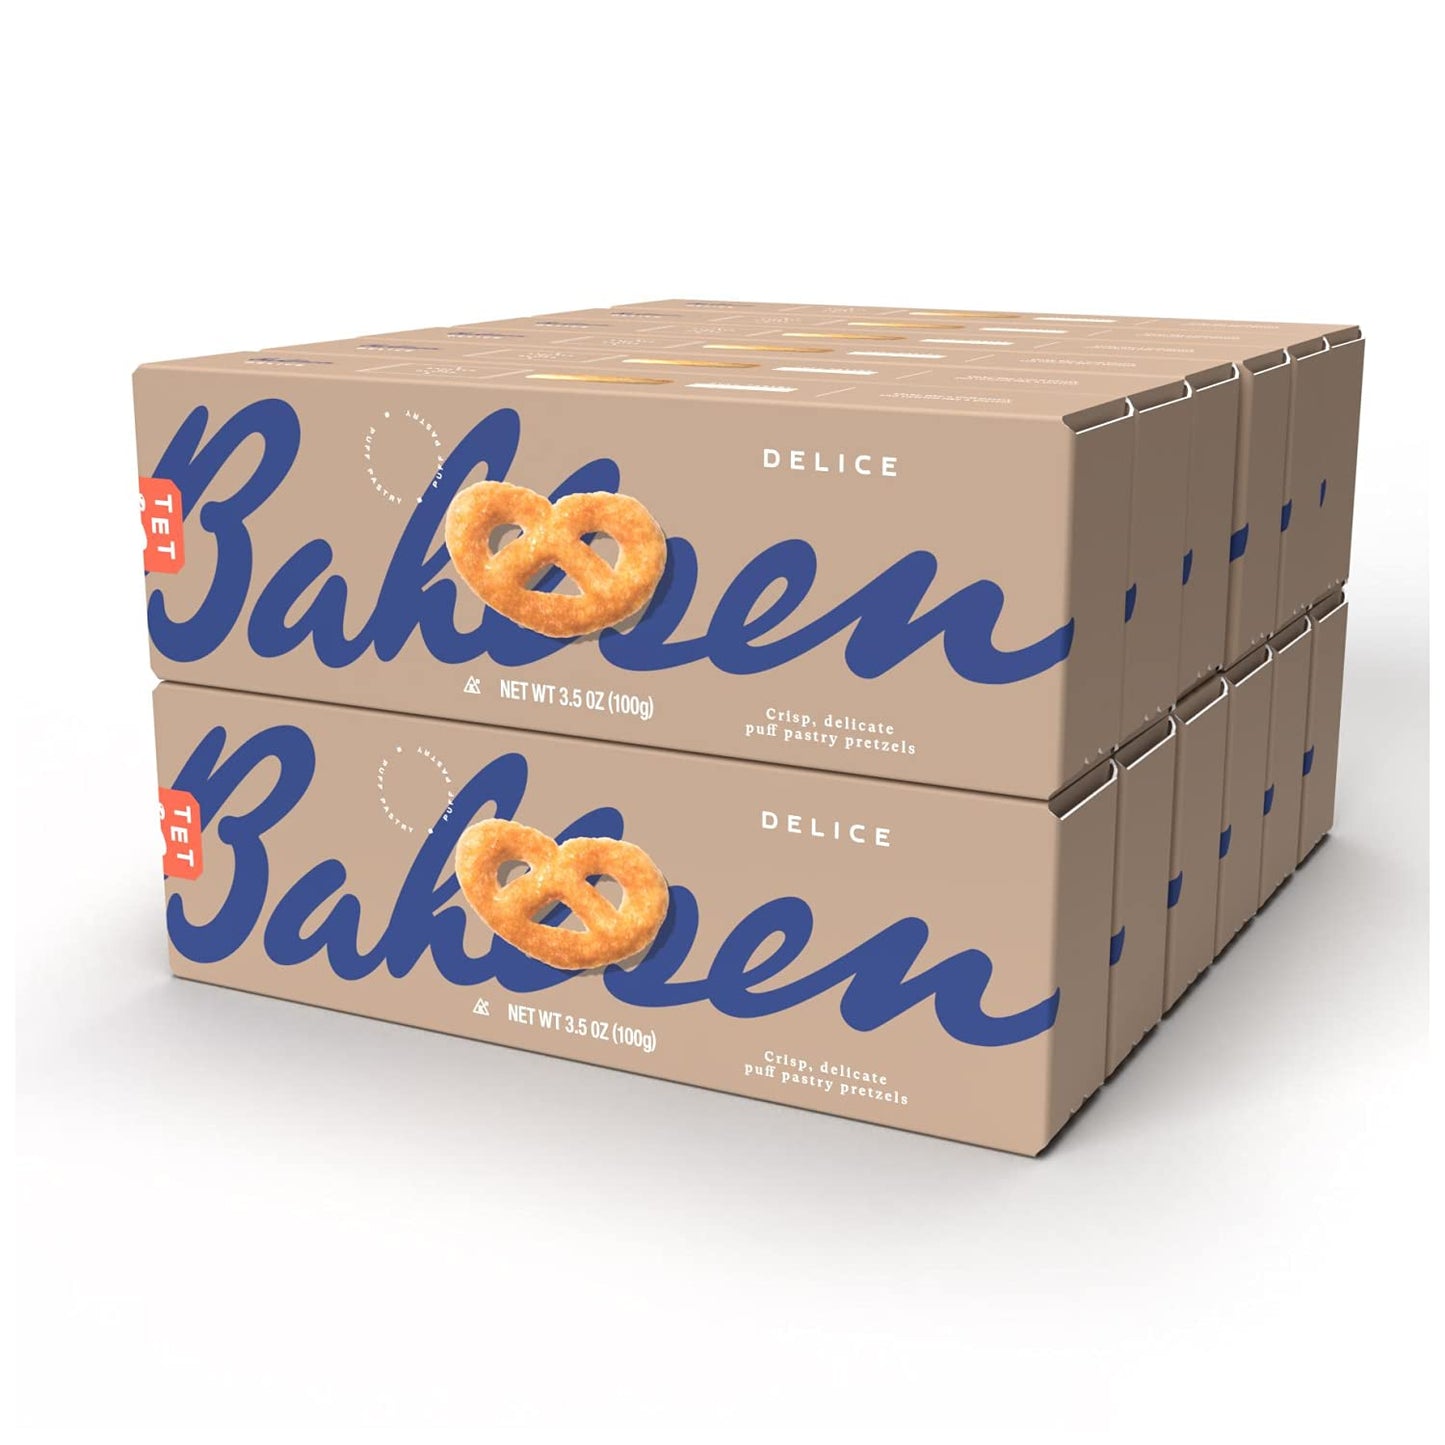 Bahlsen Delice Cookies (12 boxes) - Sweet & delicate, buttery puff pastry twists with light crispy layers - 3.5 oz boxes